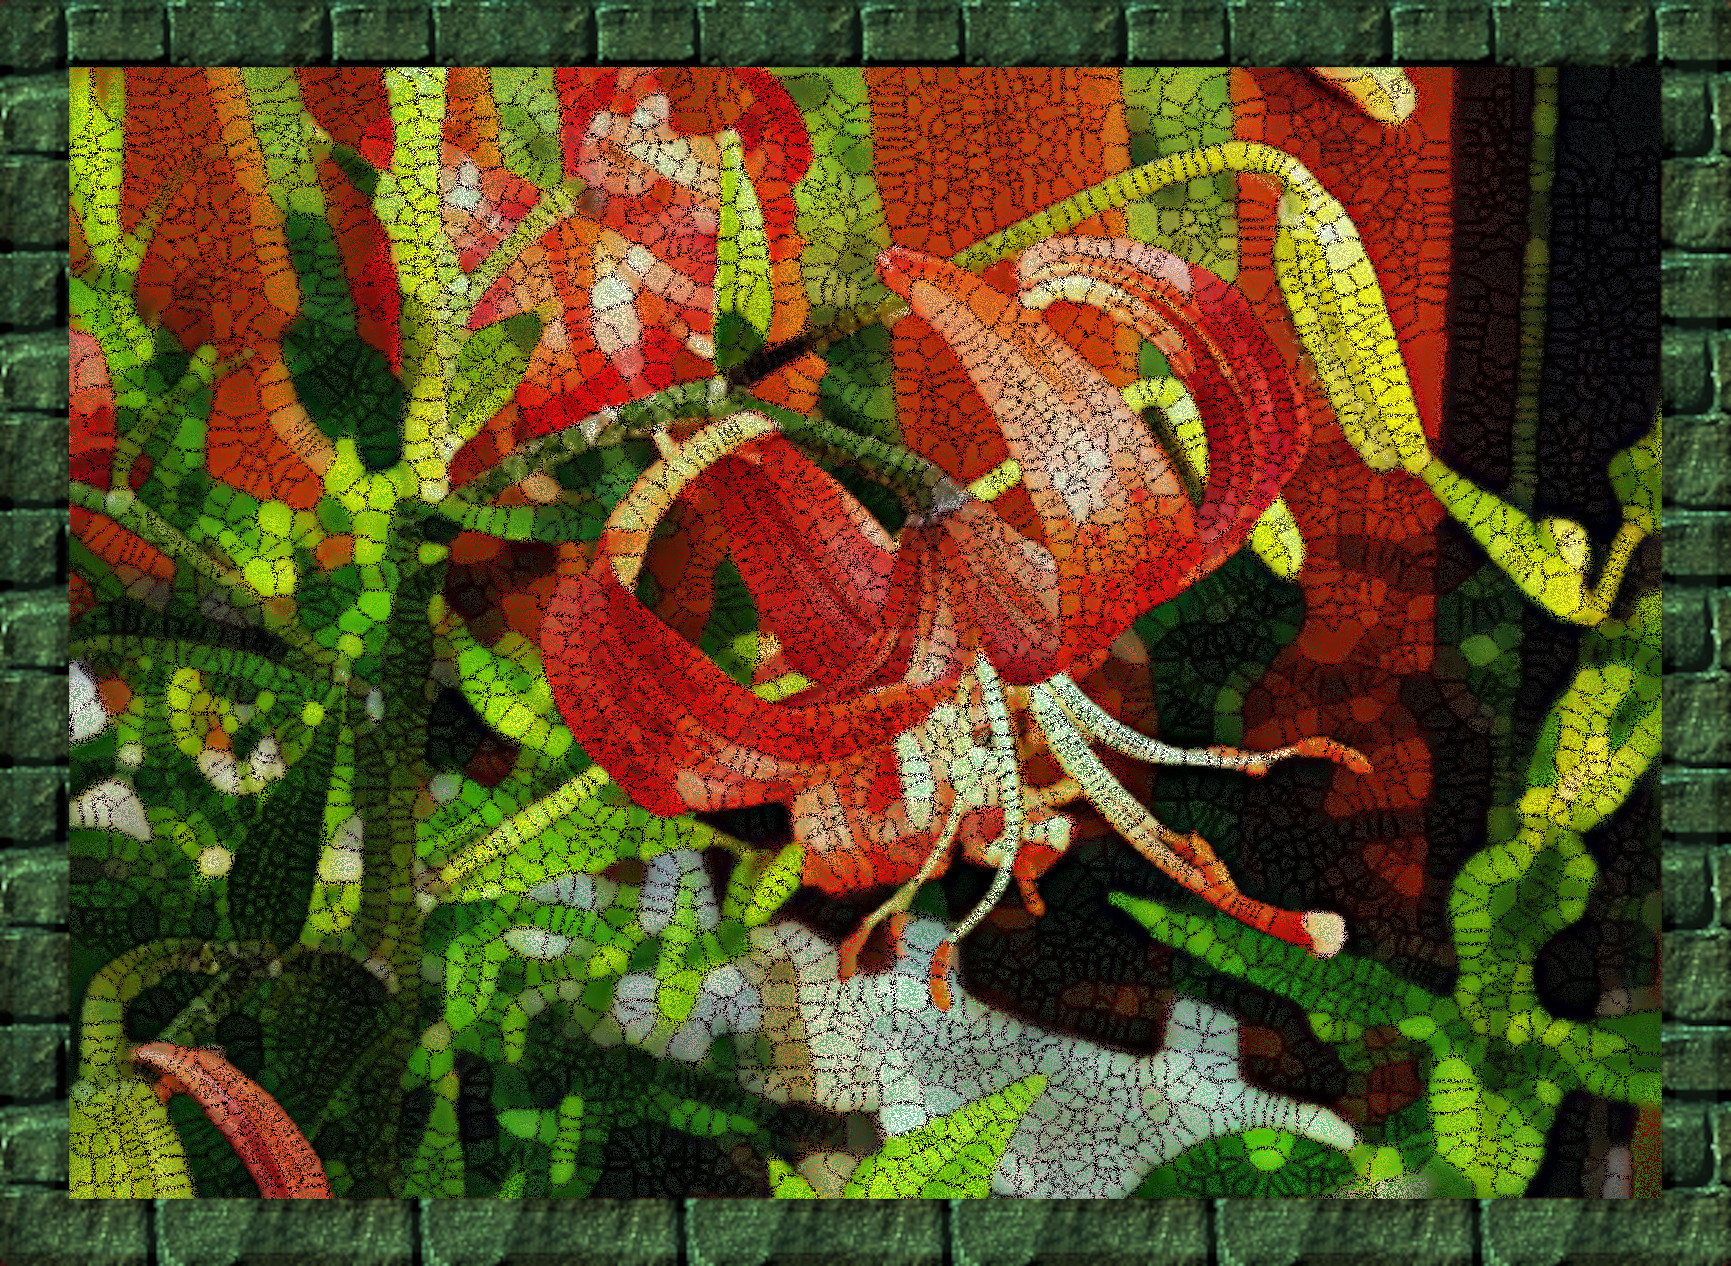 2022-03-17 14-04-29flowers-g7de323e8a_1920 as a Mosaic with Texture Coloree (lines look basic).jpeg